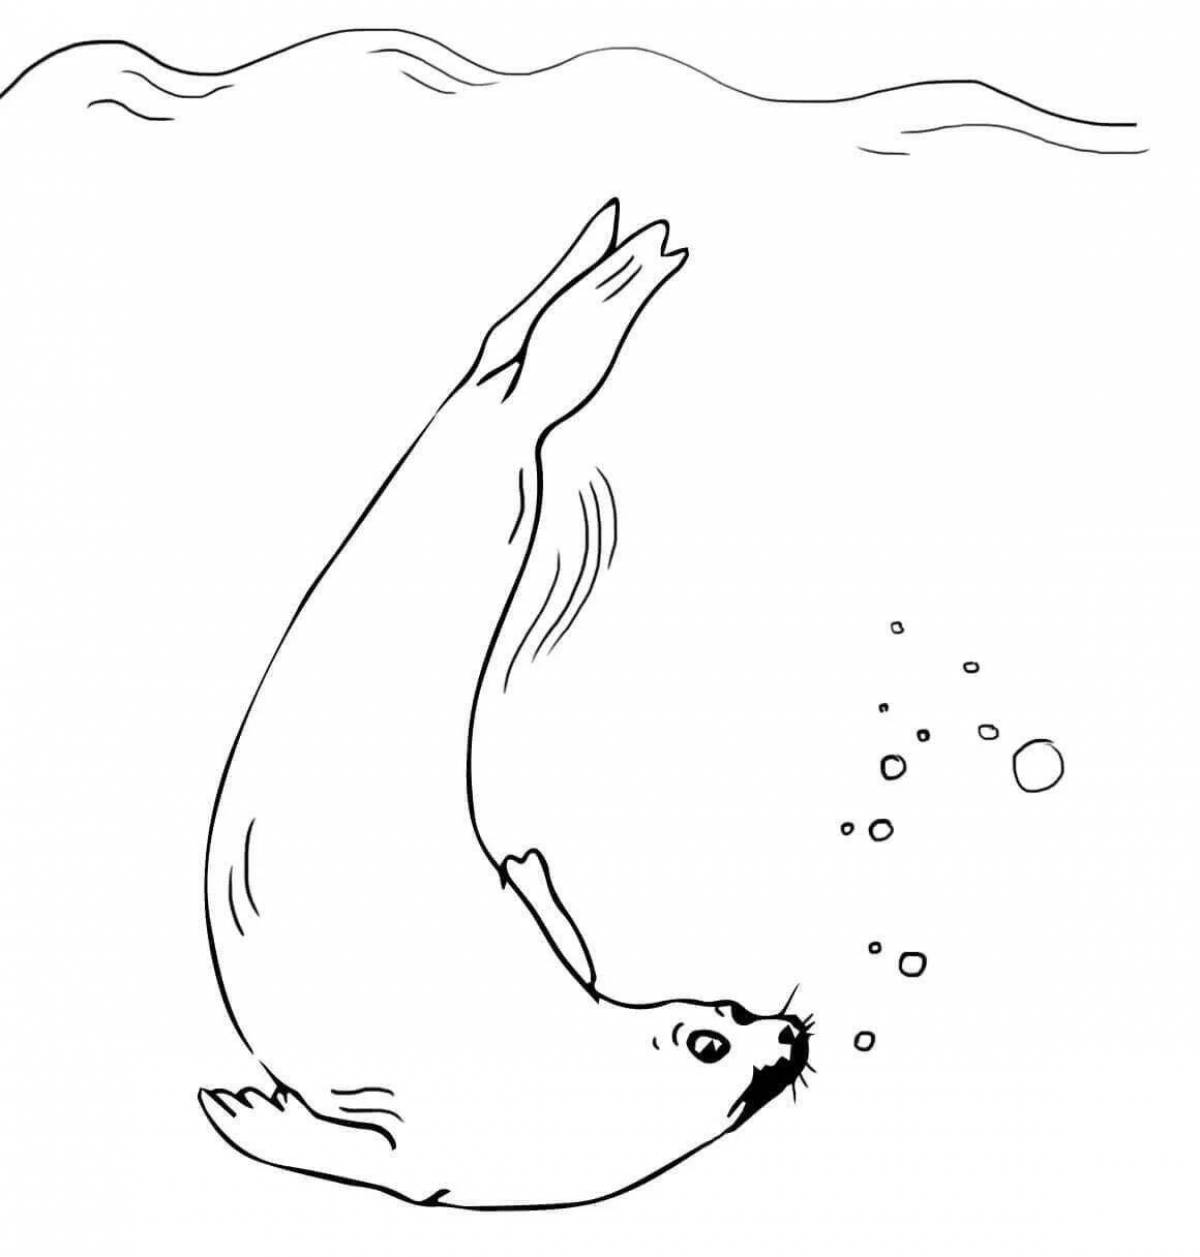 Awesome baikal seal coloring page